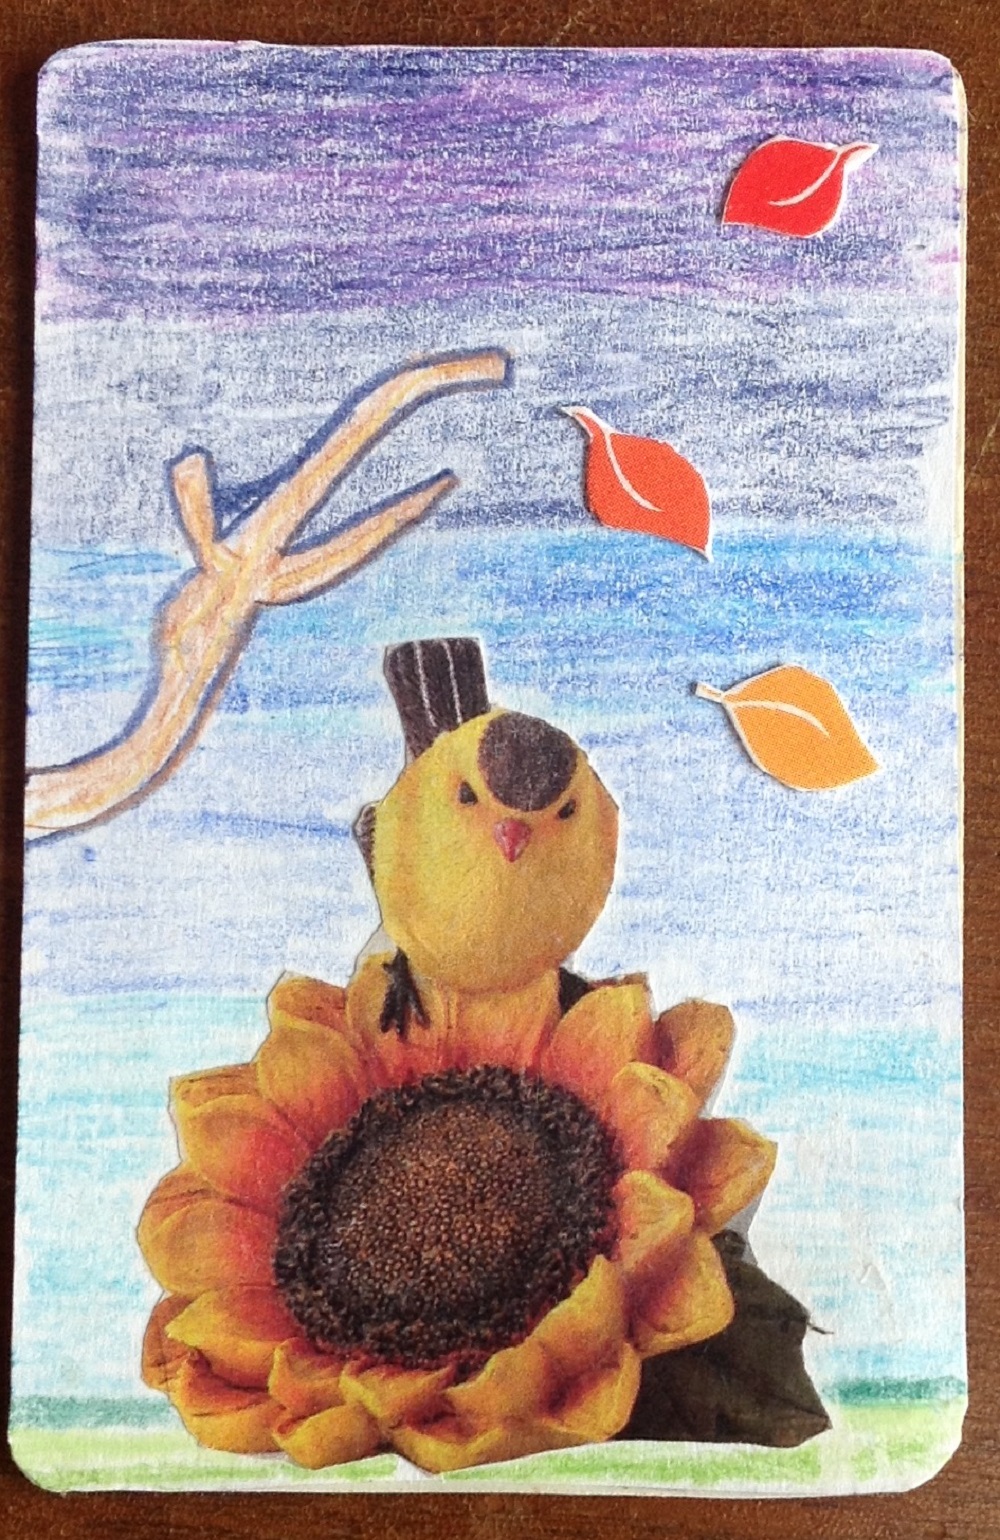 Artist Trading card made my me entitled "Memories of Summer"